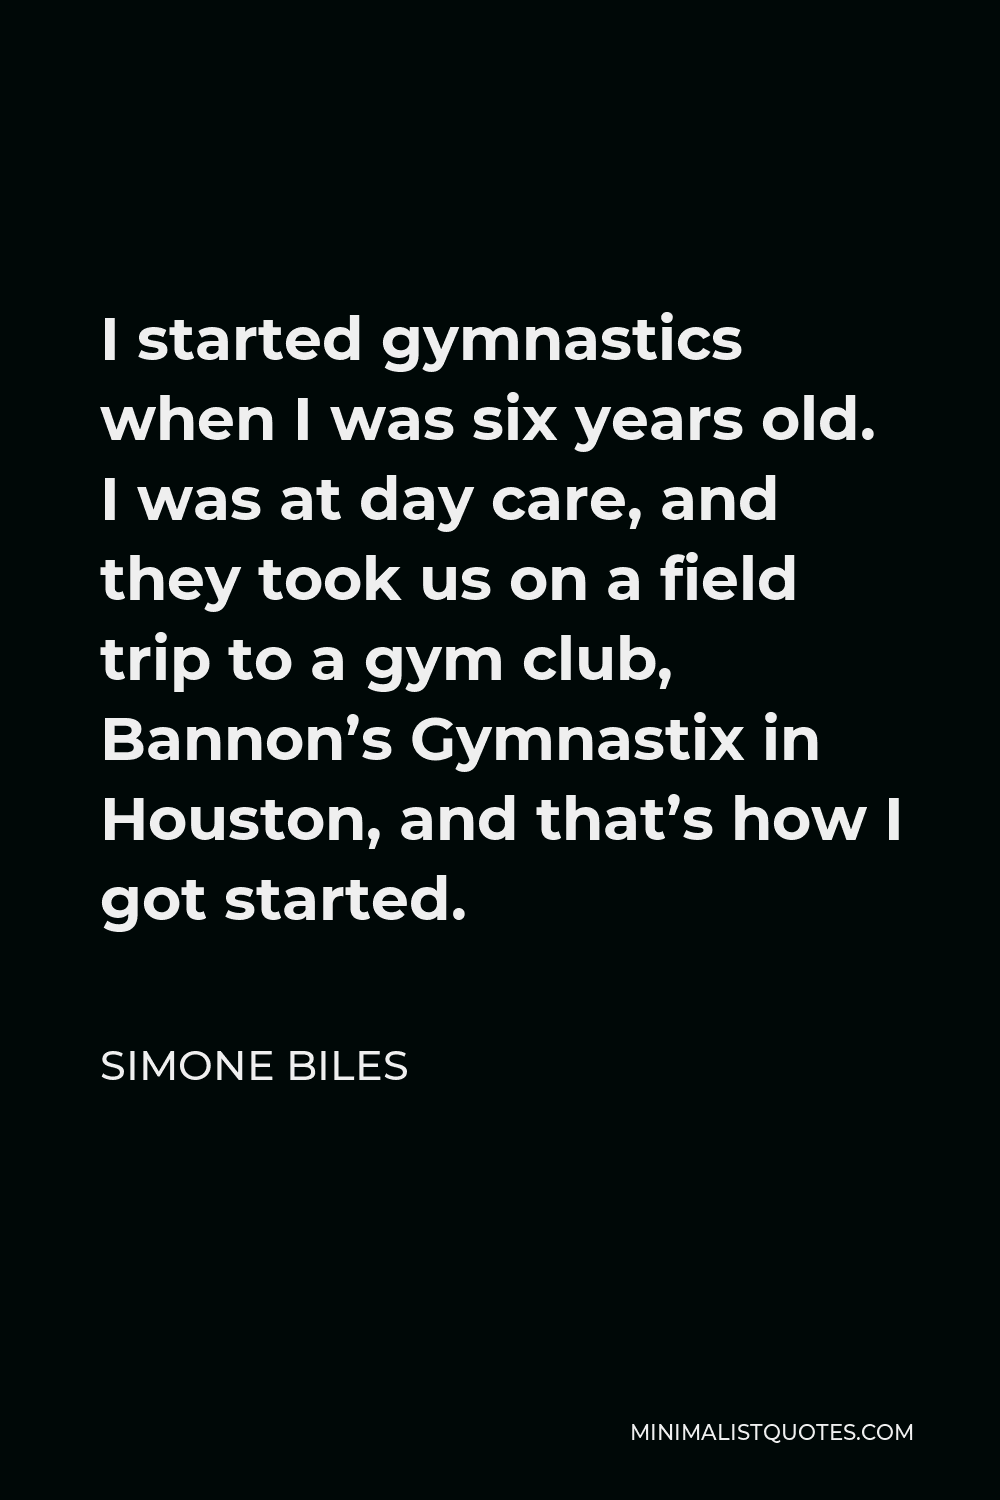 Simone Biles Quote - I started gymnastics when I was six years old. I was at day care, and they took us on a field trip to a gym club, Bannon’s Gymnastix in Houston, and that’s how I got started.